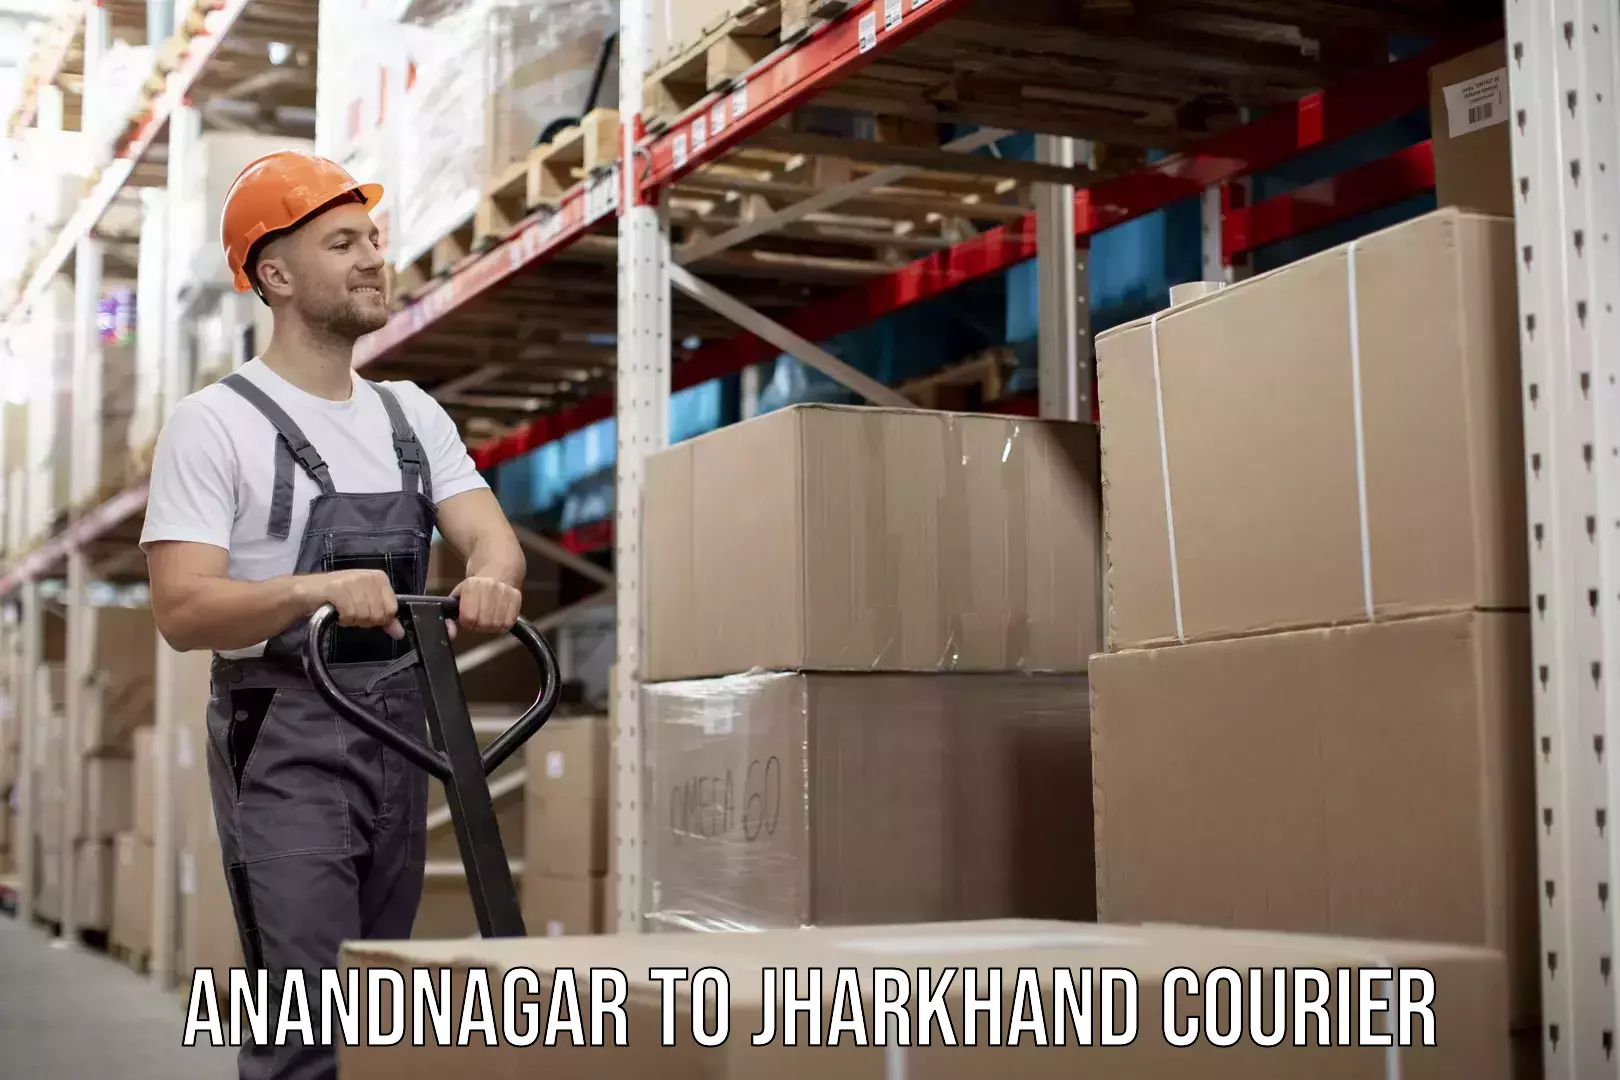 Automated parcel services Anandnagar to Jharkhand